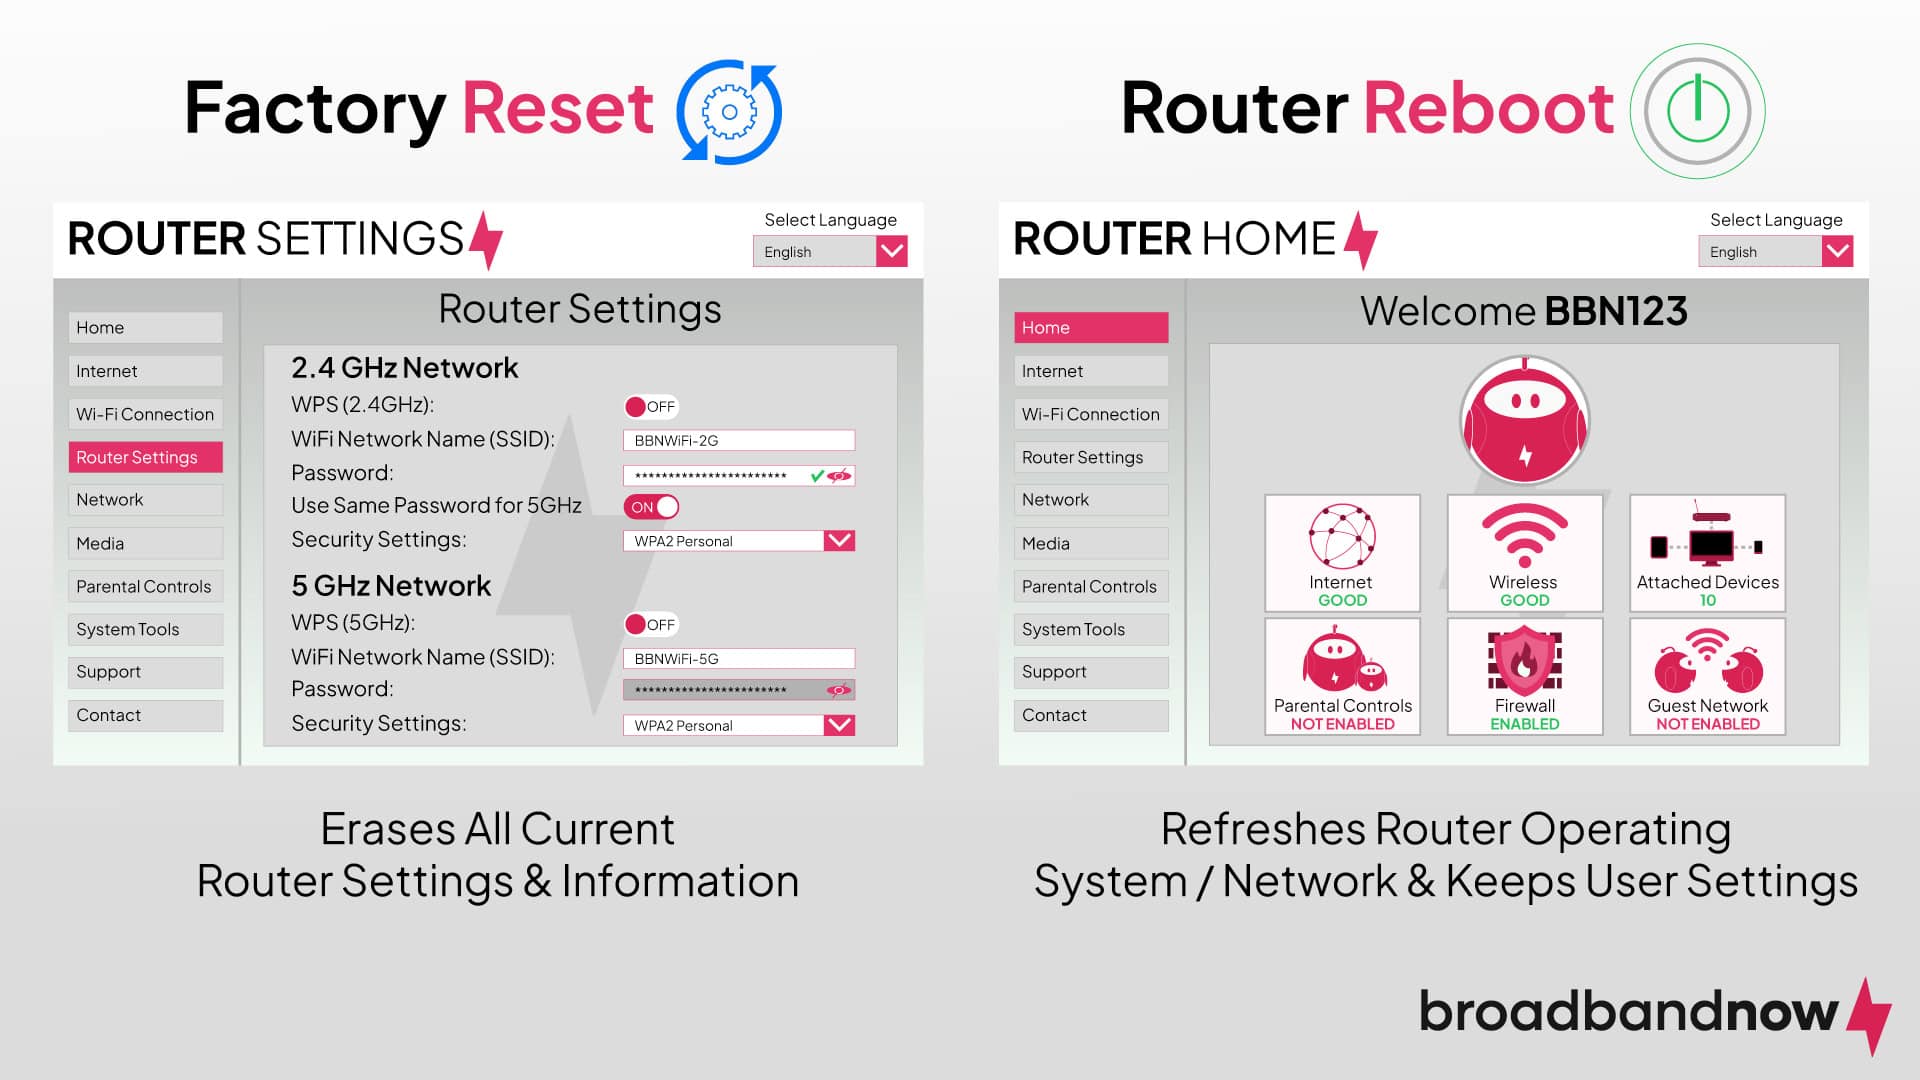 A graphic illustrating the difference between a router factory reset and a reboot.